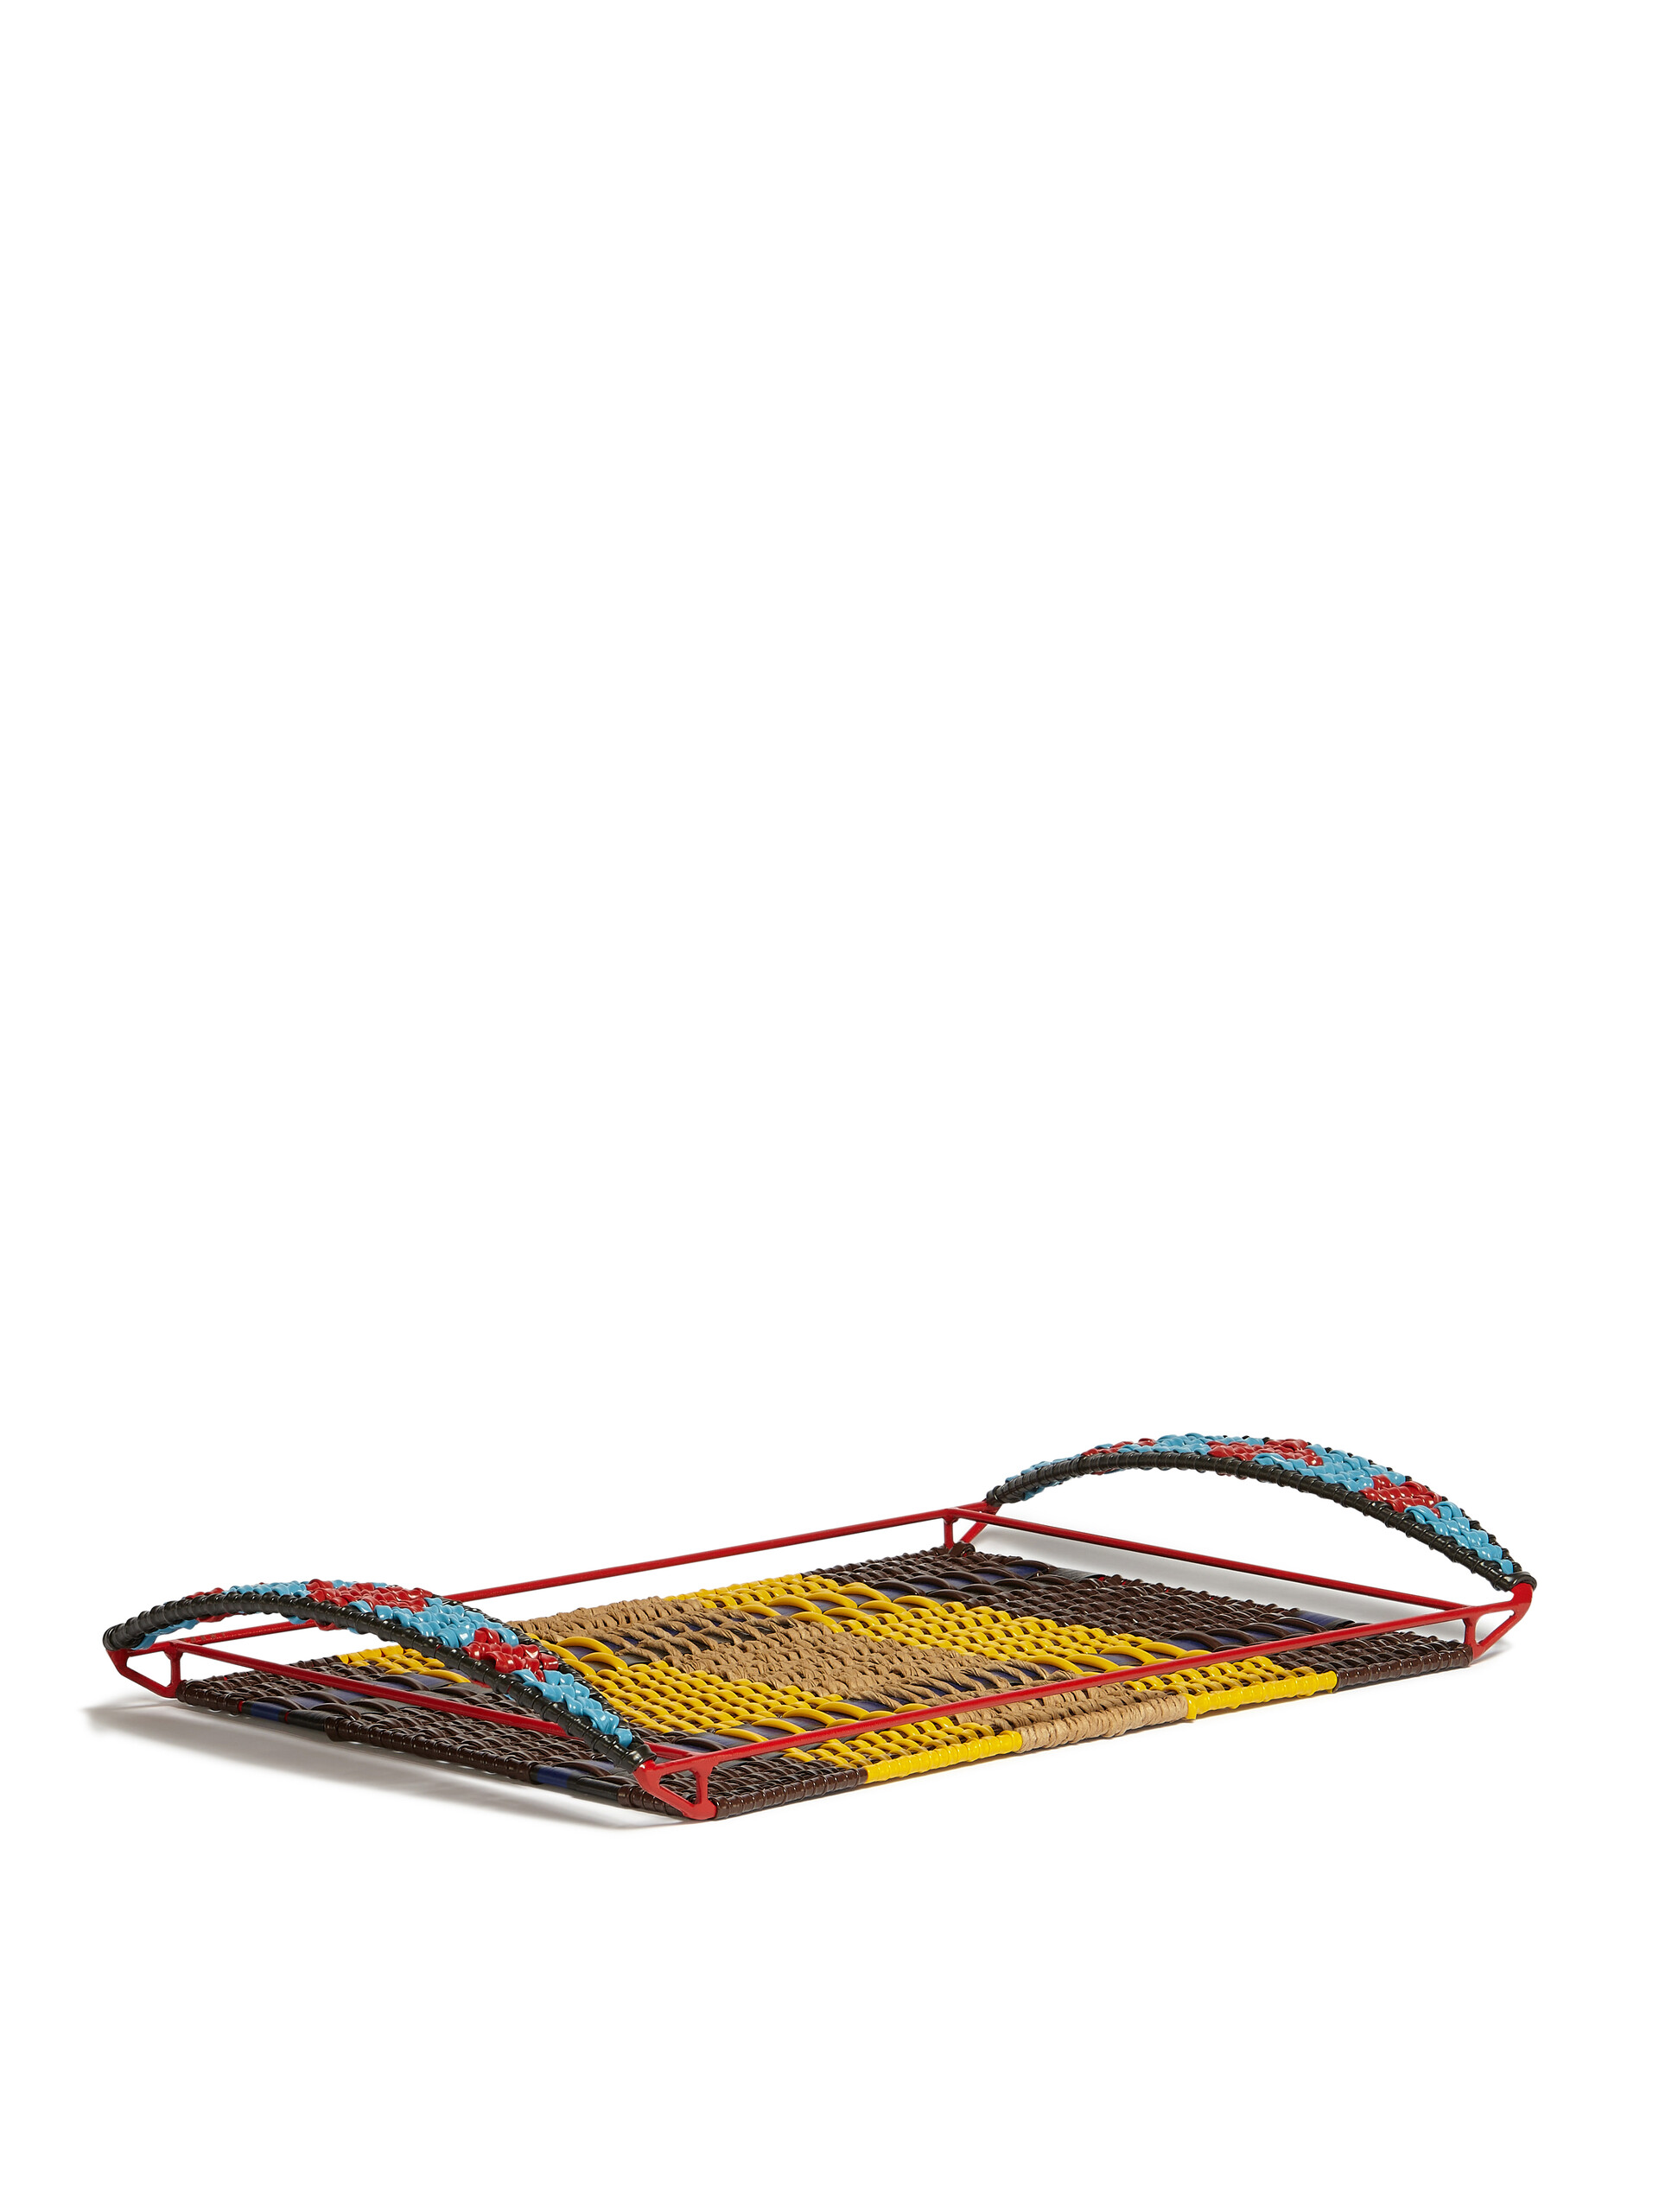 MARNI MARKET tray in iron and brown and yellow PVC - Accessories - Image 2